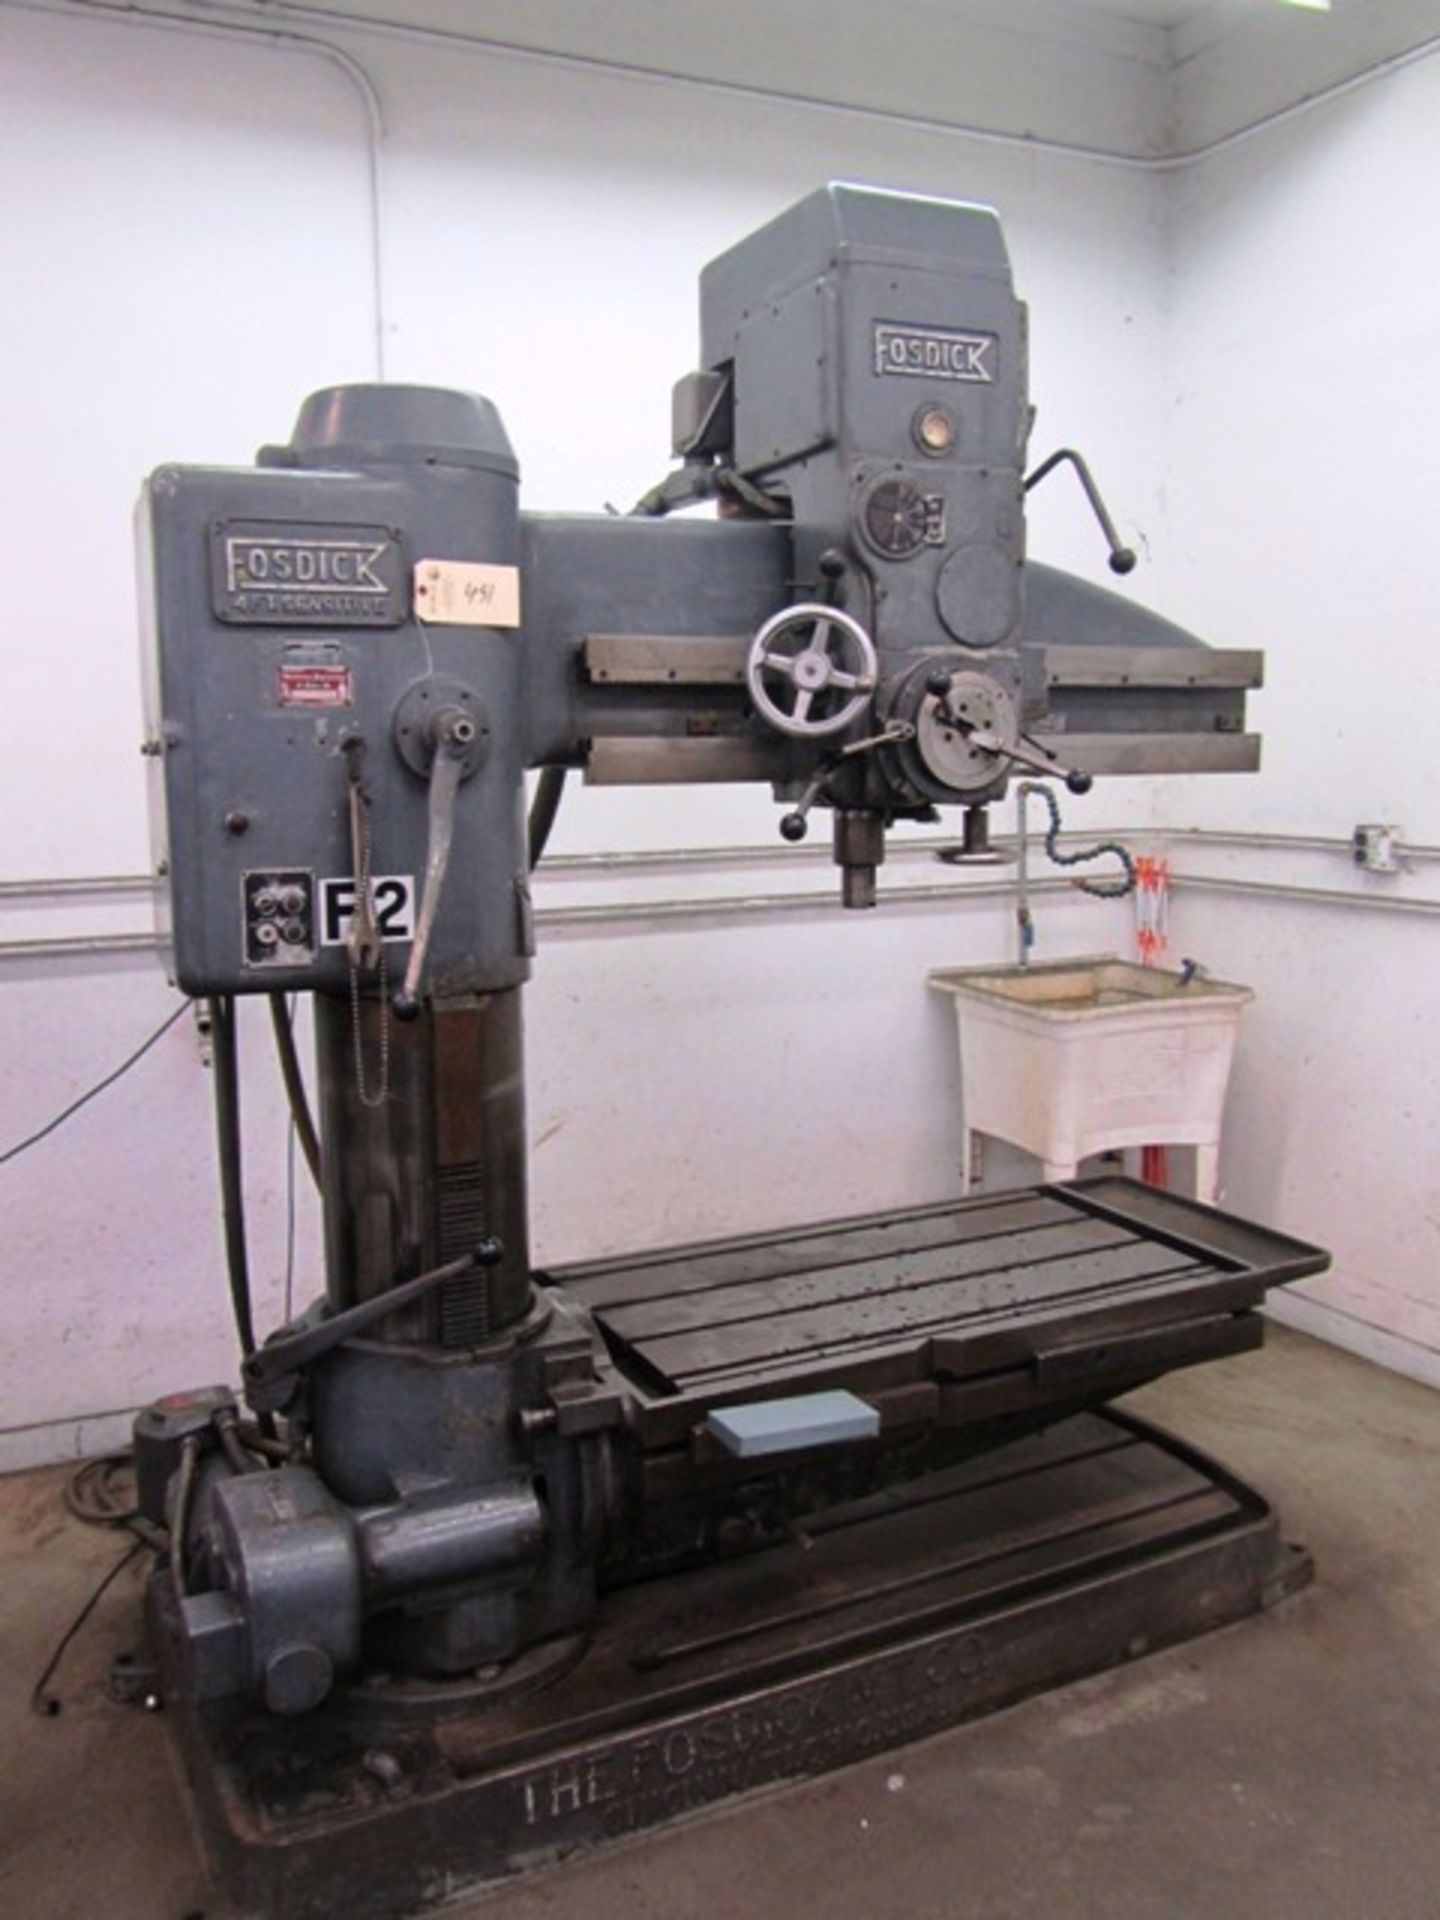 Fosdick 4' Sensitive Radial Arm Drill with Spindle Speeds to 1500 RPM, 24'' x 24'' Power Feed